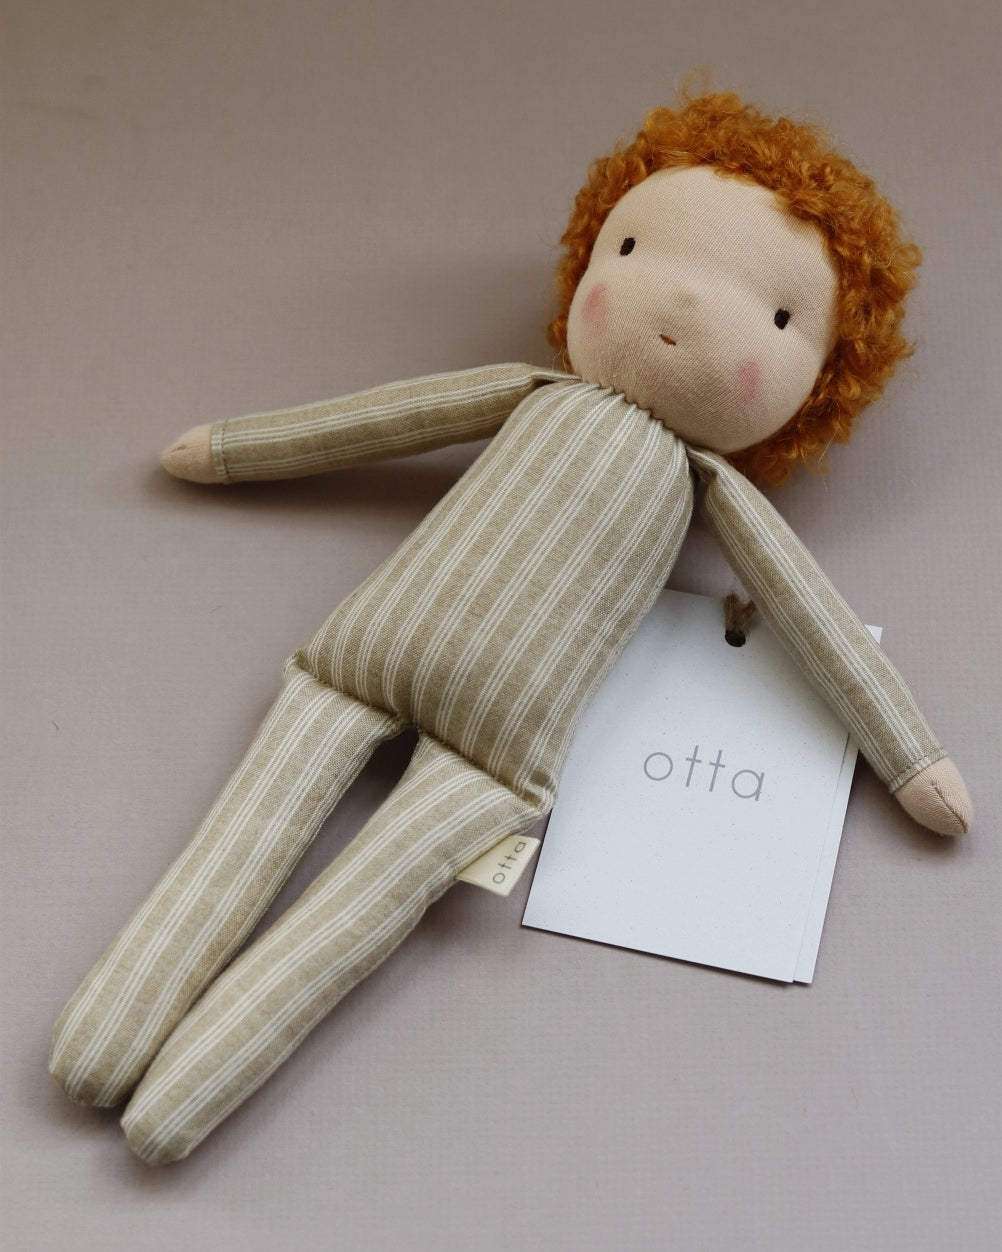 Otta Doll “Middle Brother" 3